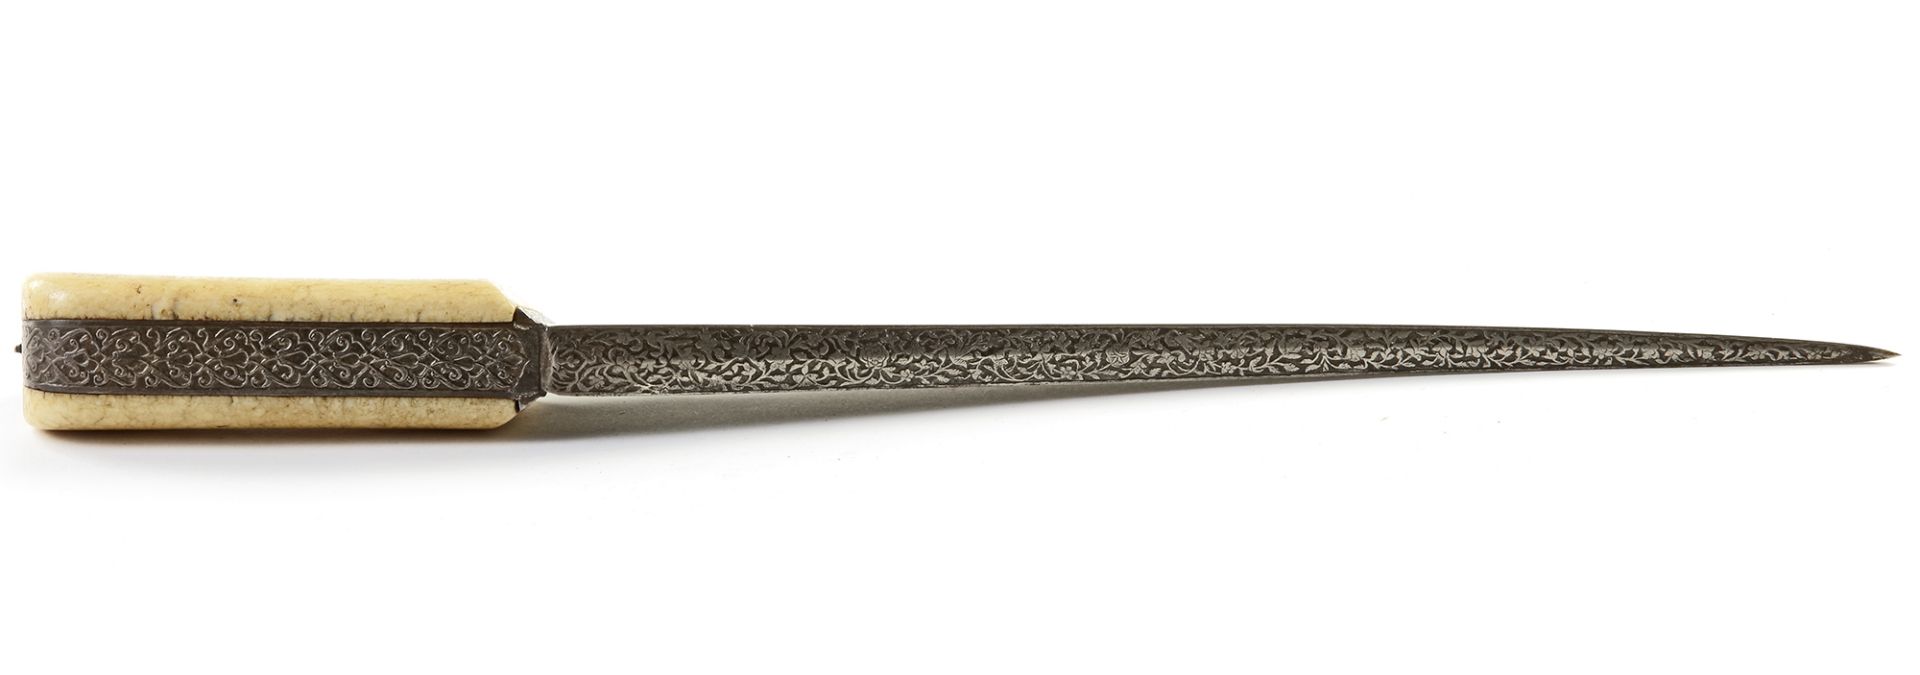 AN IVORY-HILTED WATERED-STEEL PESH-KABZ, INDIA, LATE 18TH-EARLY 19TH CENTURY - Bild 11 aus 12